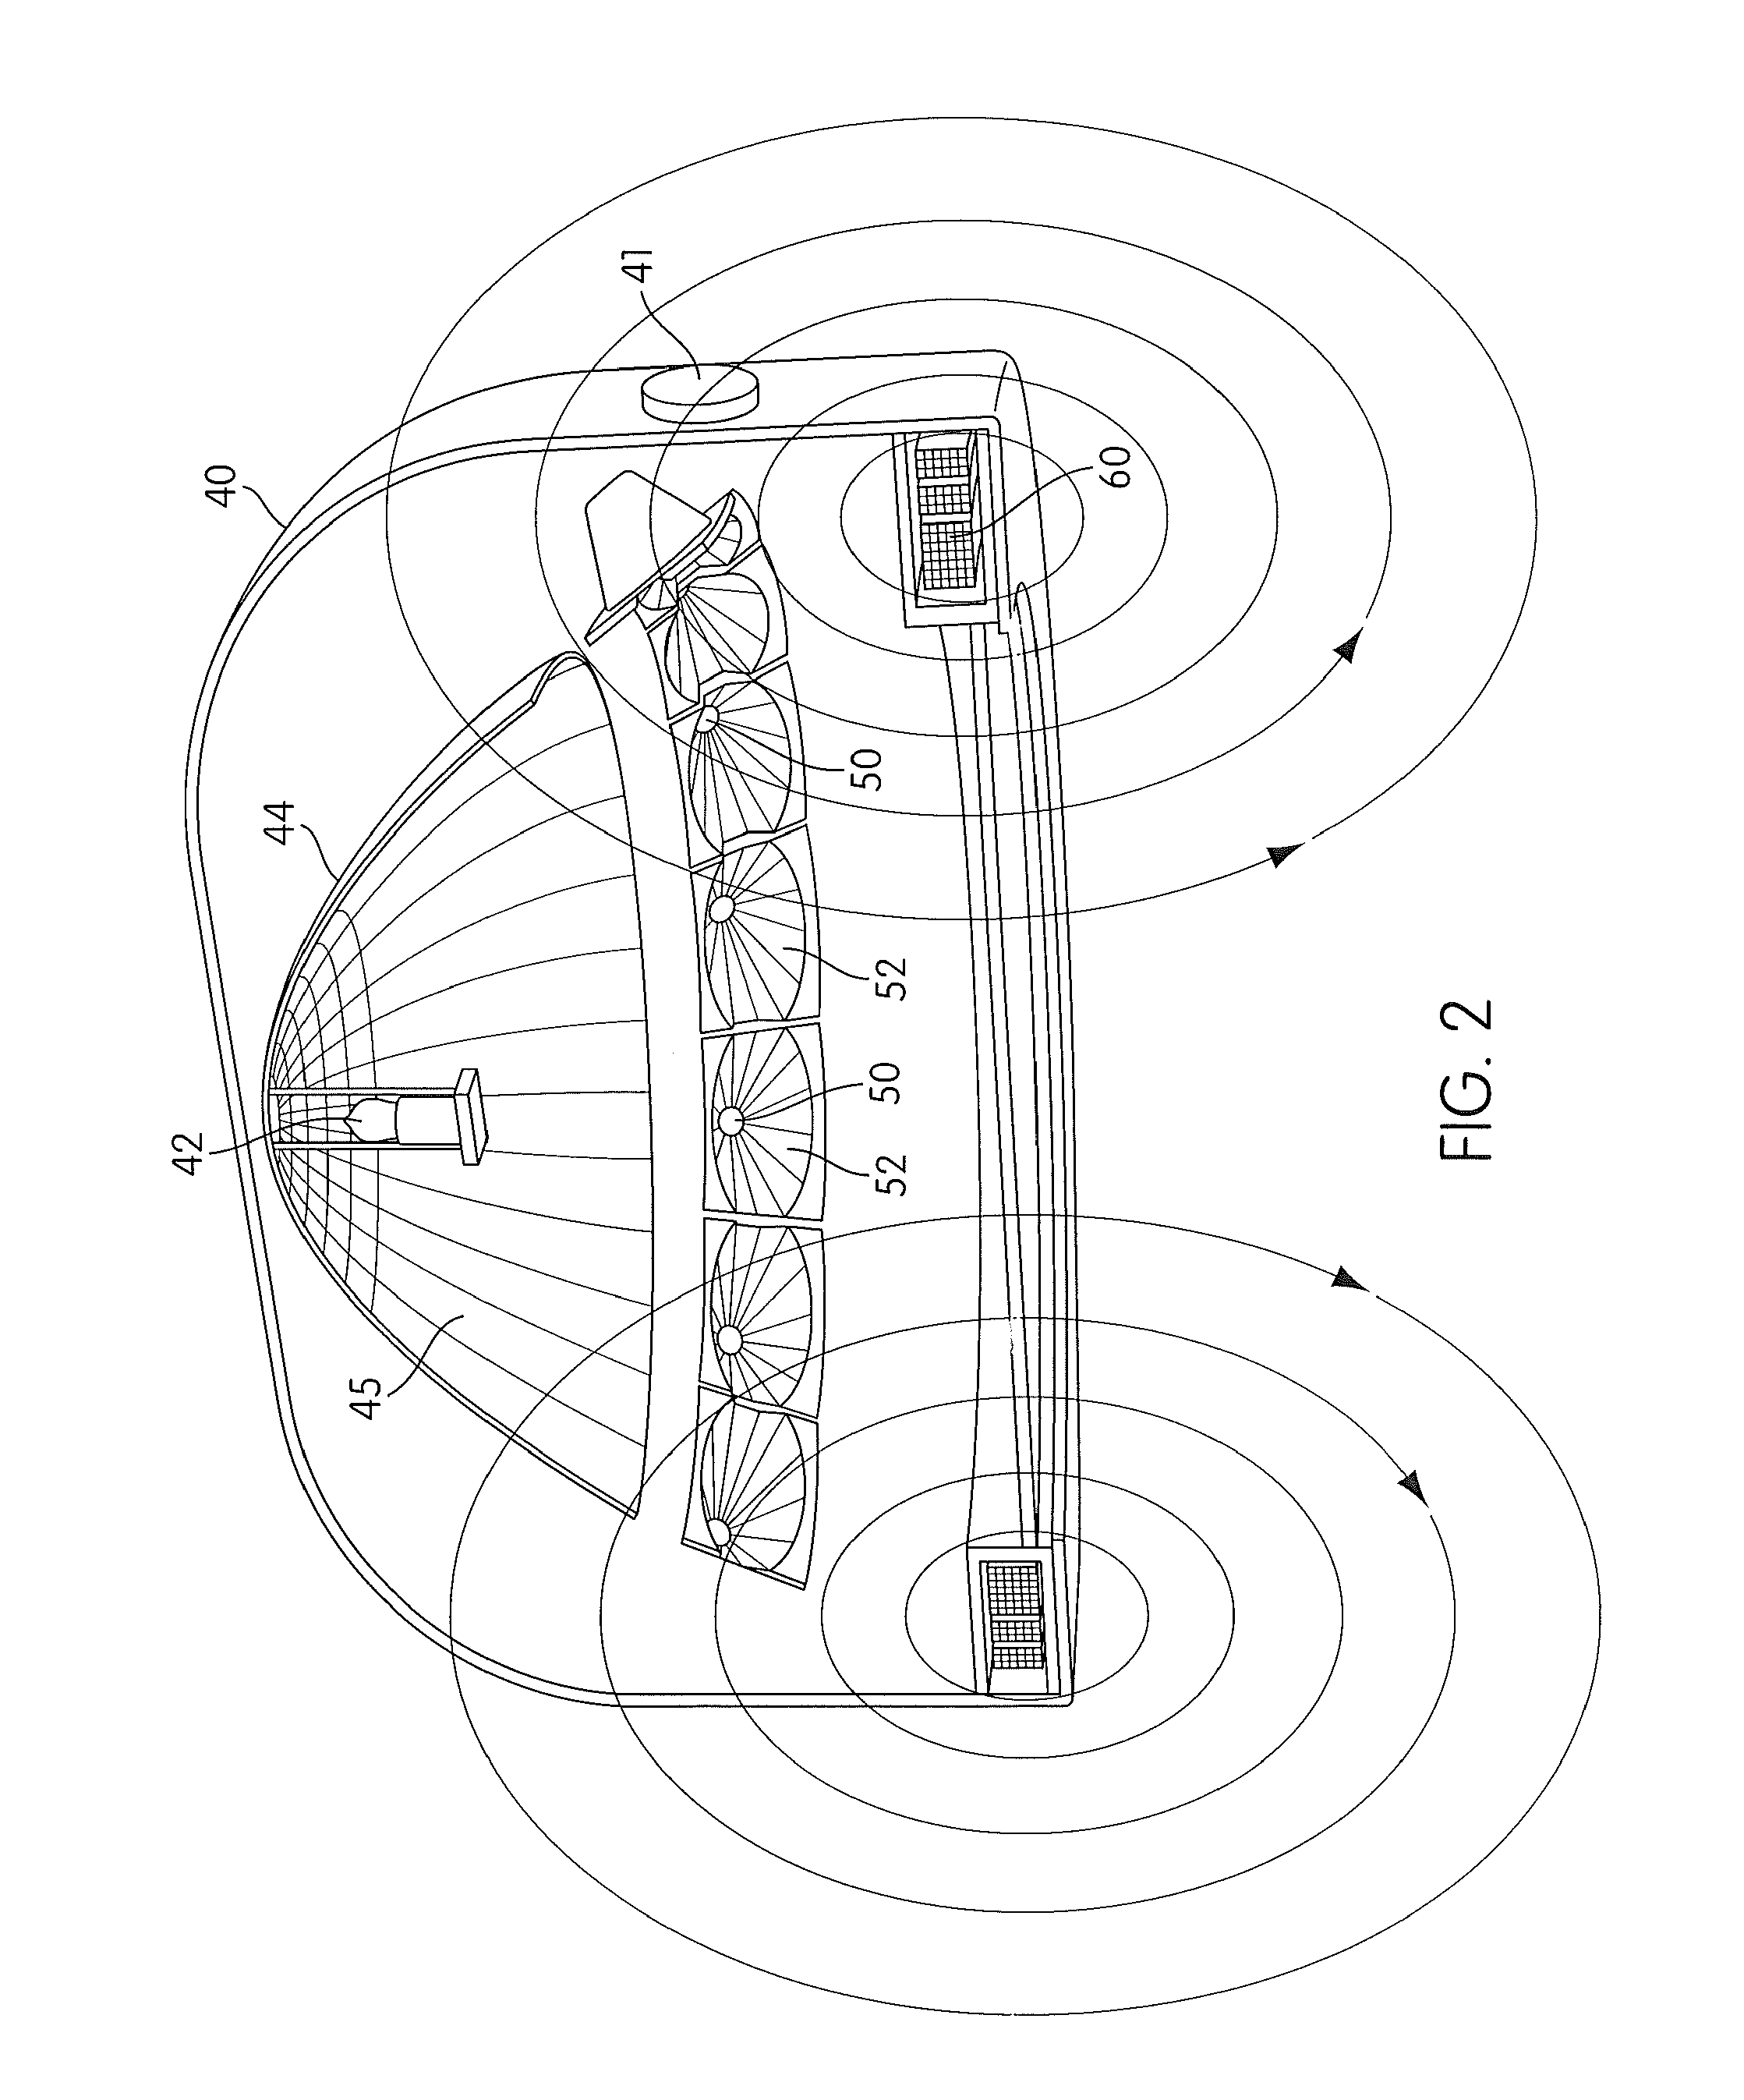 System and apparatus for treatment of biological cellular structure with electromagnetic wave energy and electromagnetic field energy sources